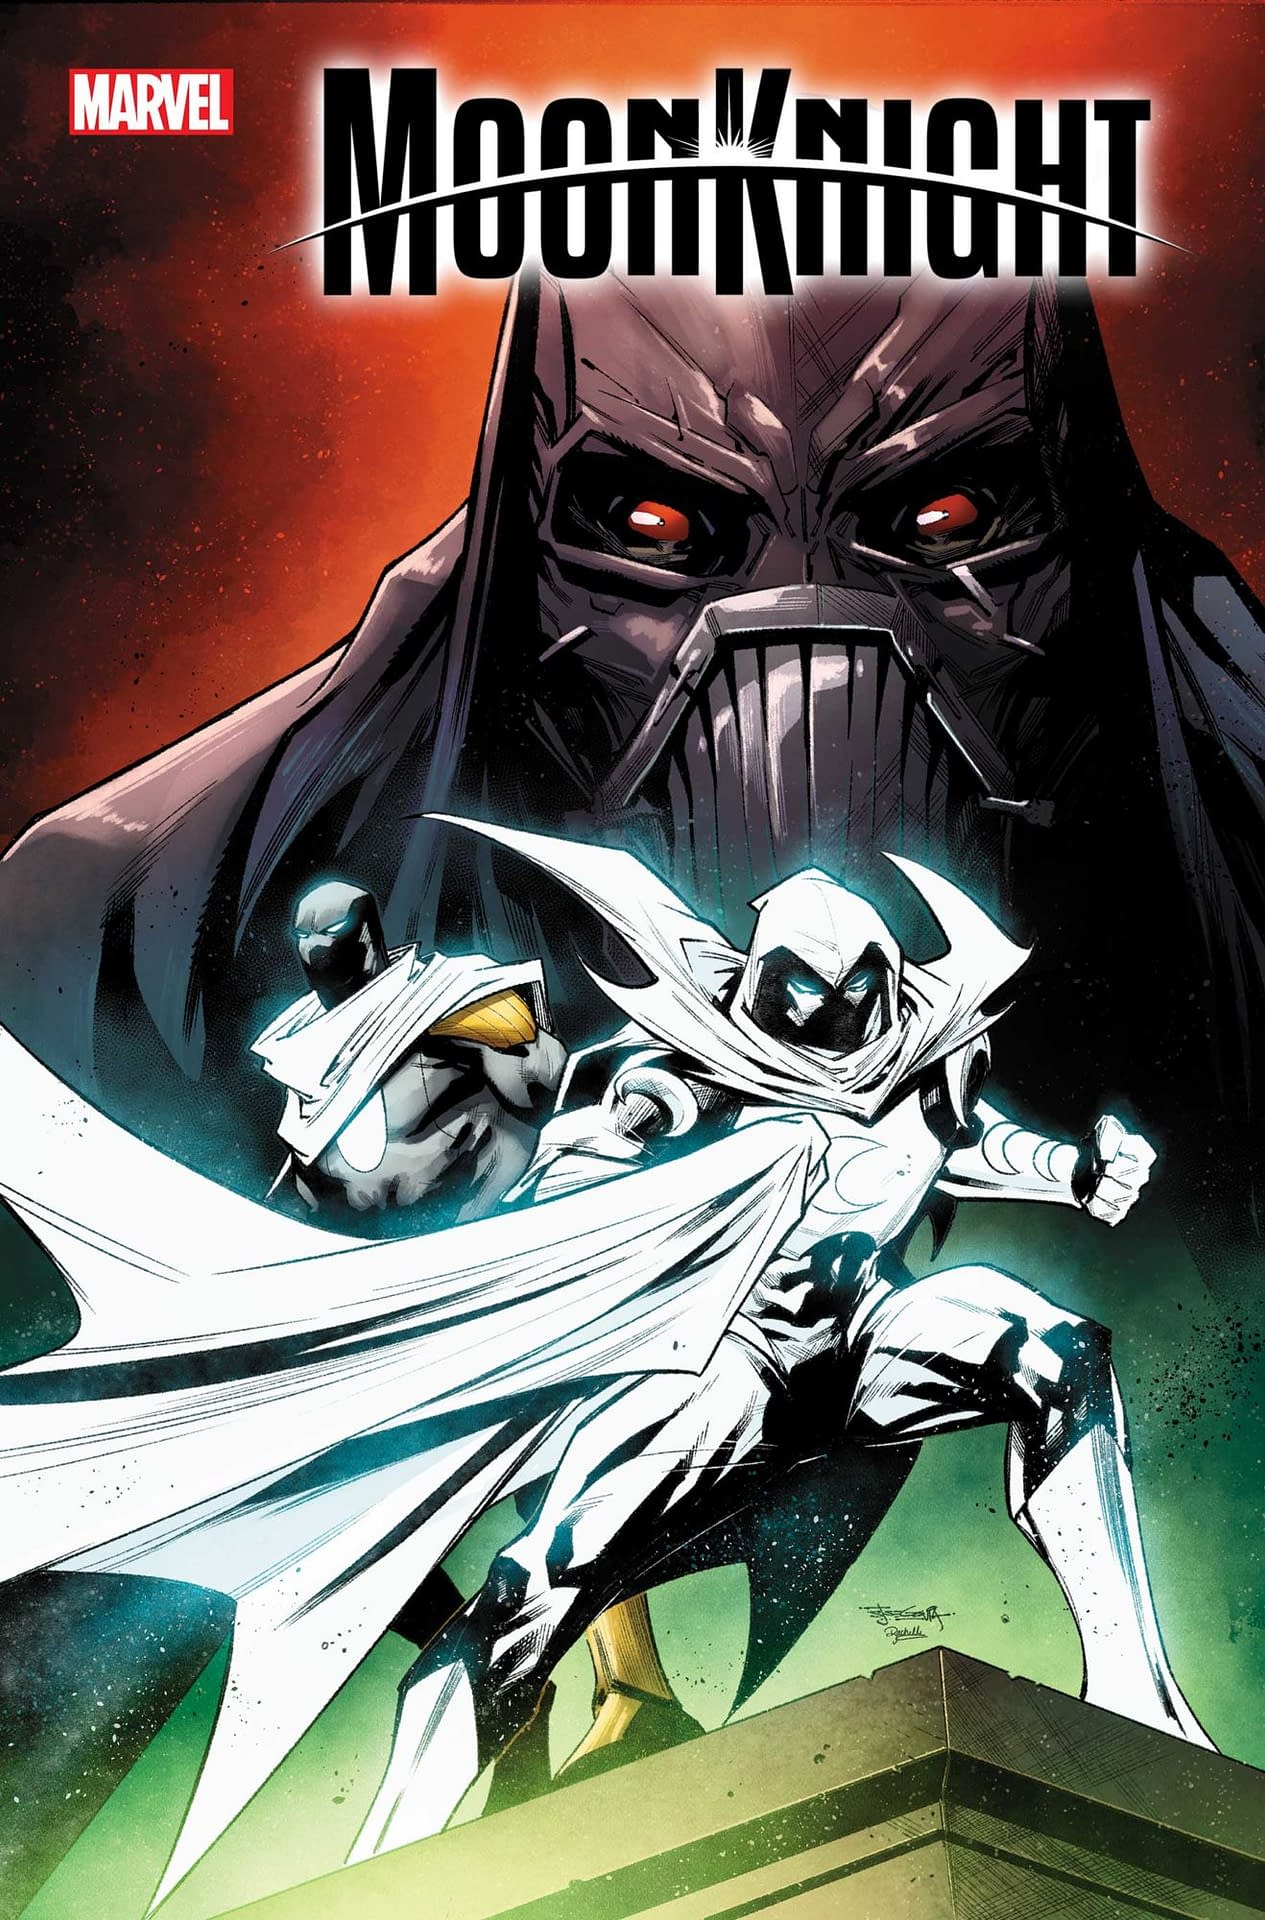 Marvel Confirms The Death Of Moon Knight